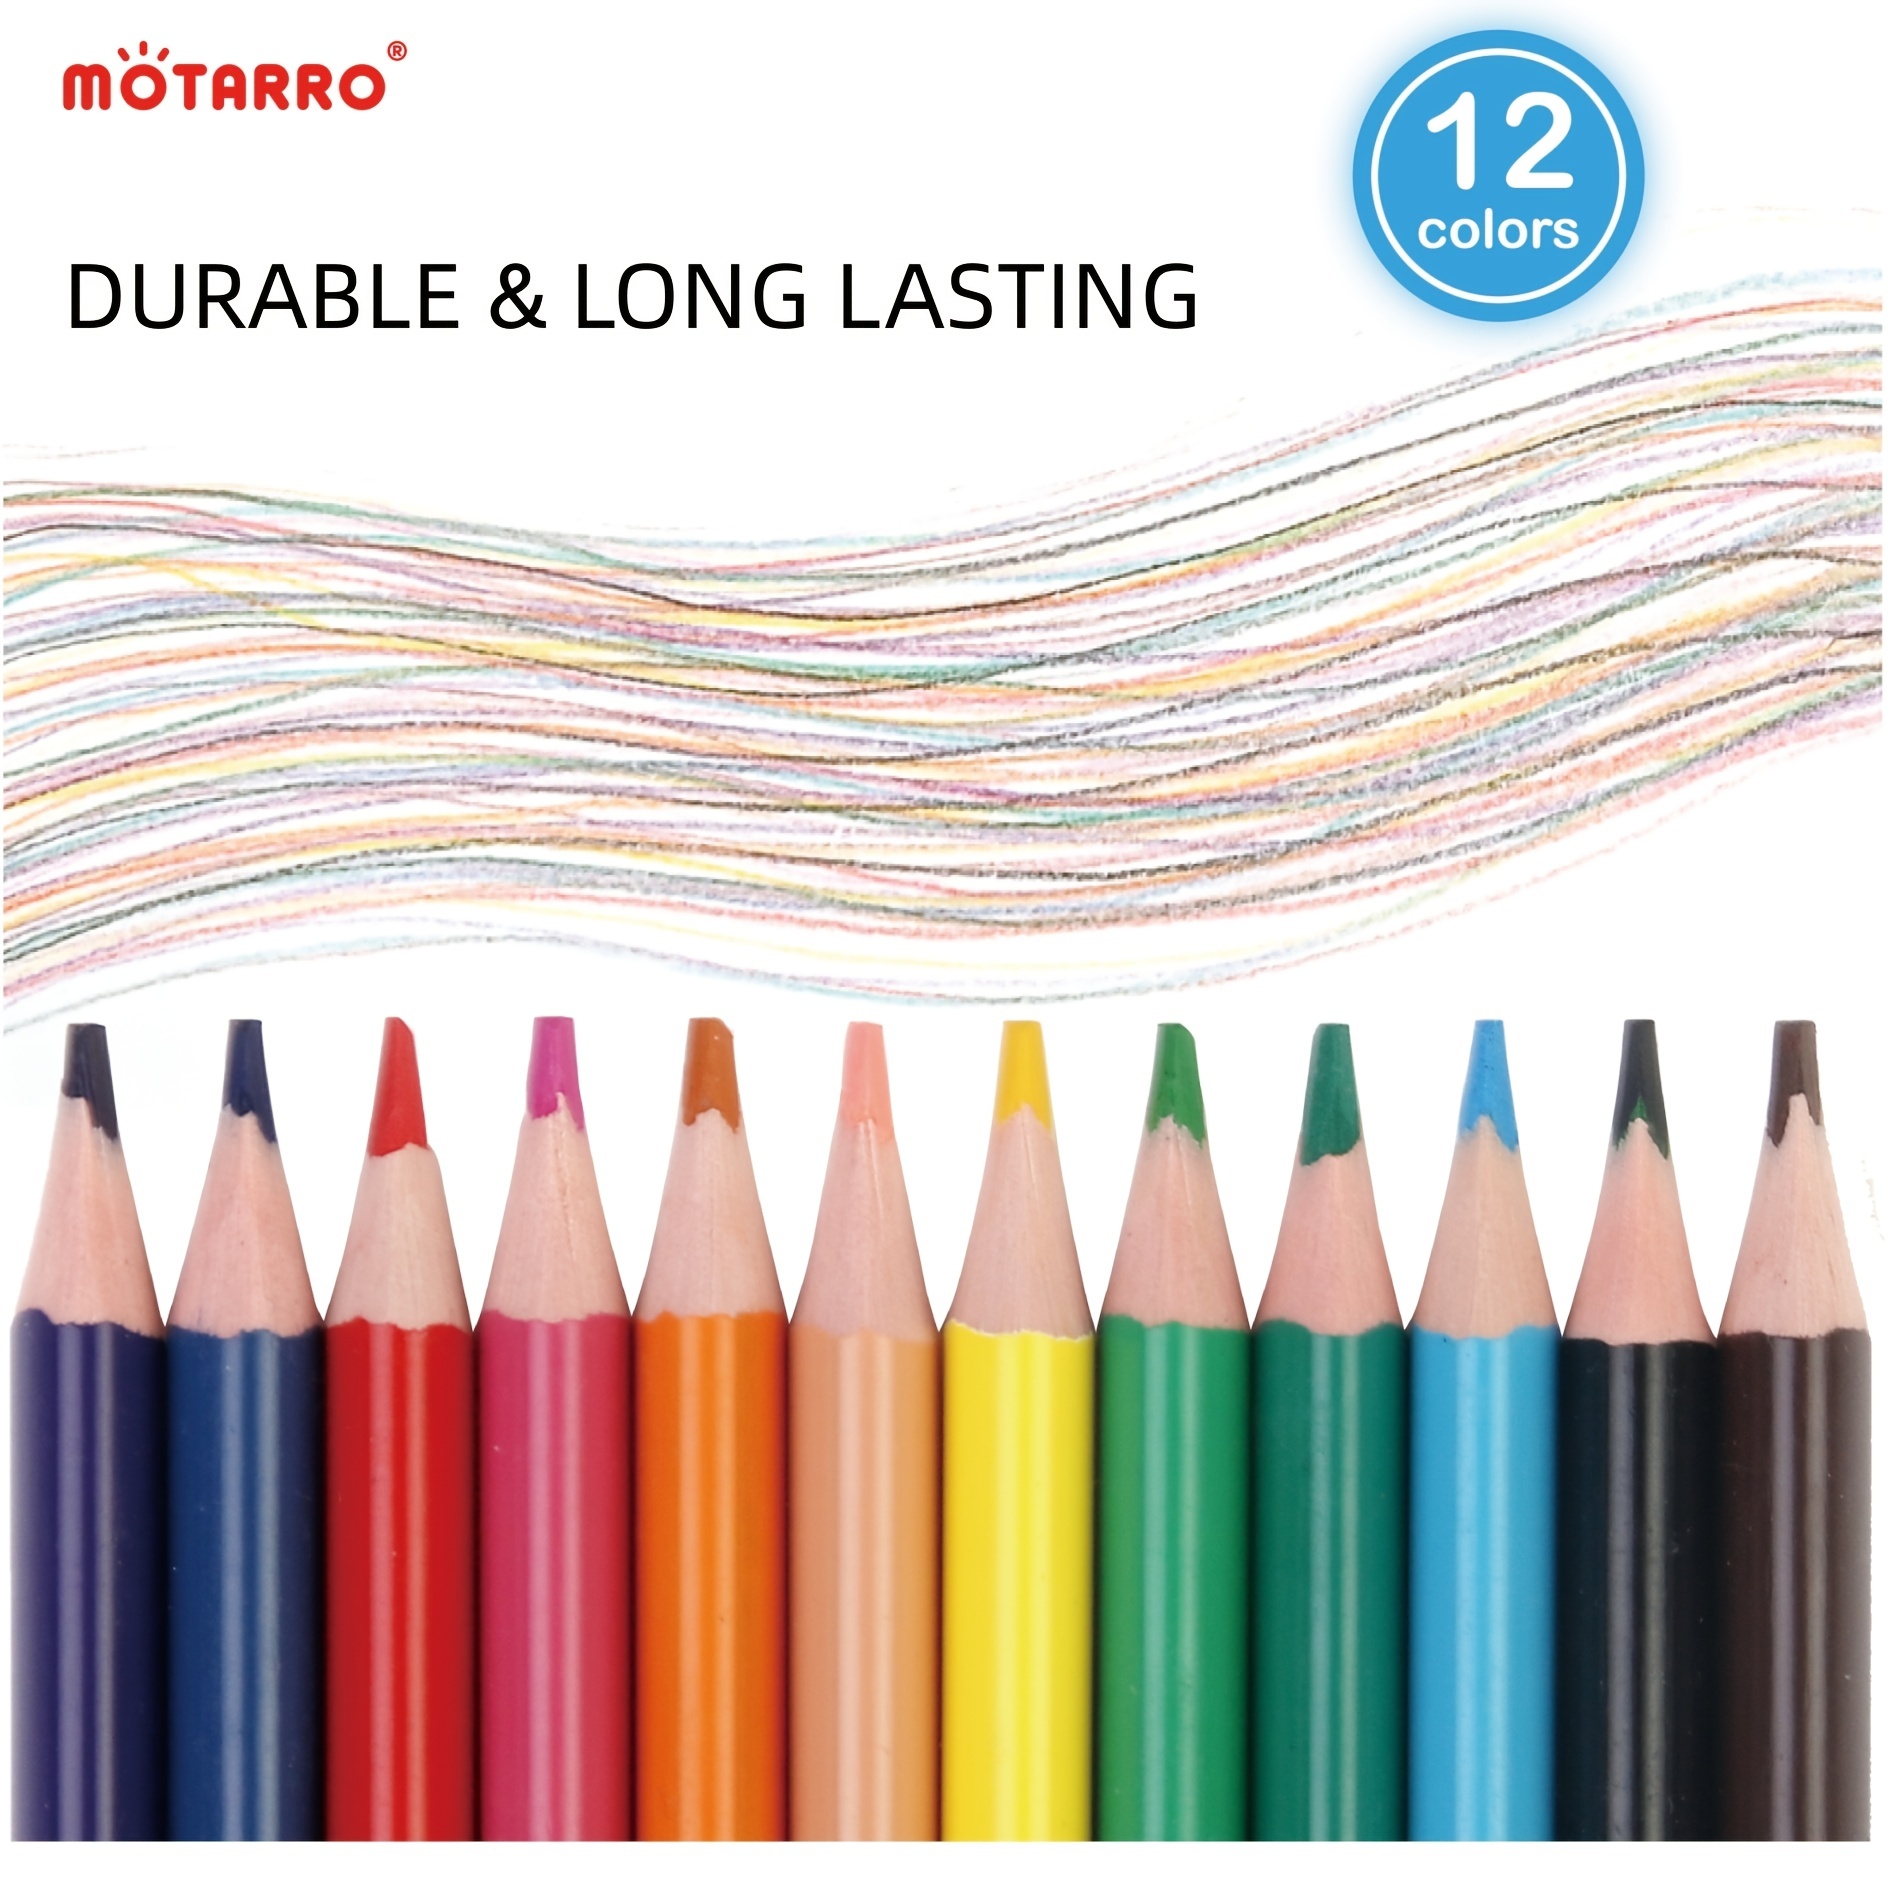 Bulk Colored Pencils, Pre-Sharpened, Back to School, 12 Assorted Colors, 24  Pack